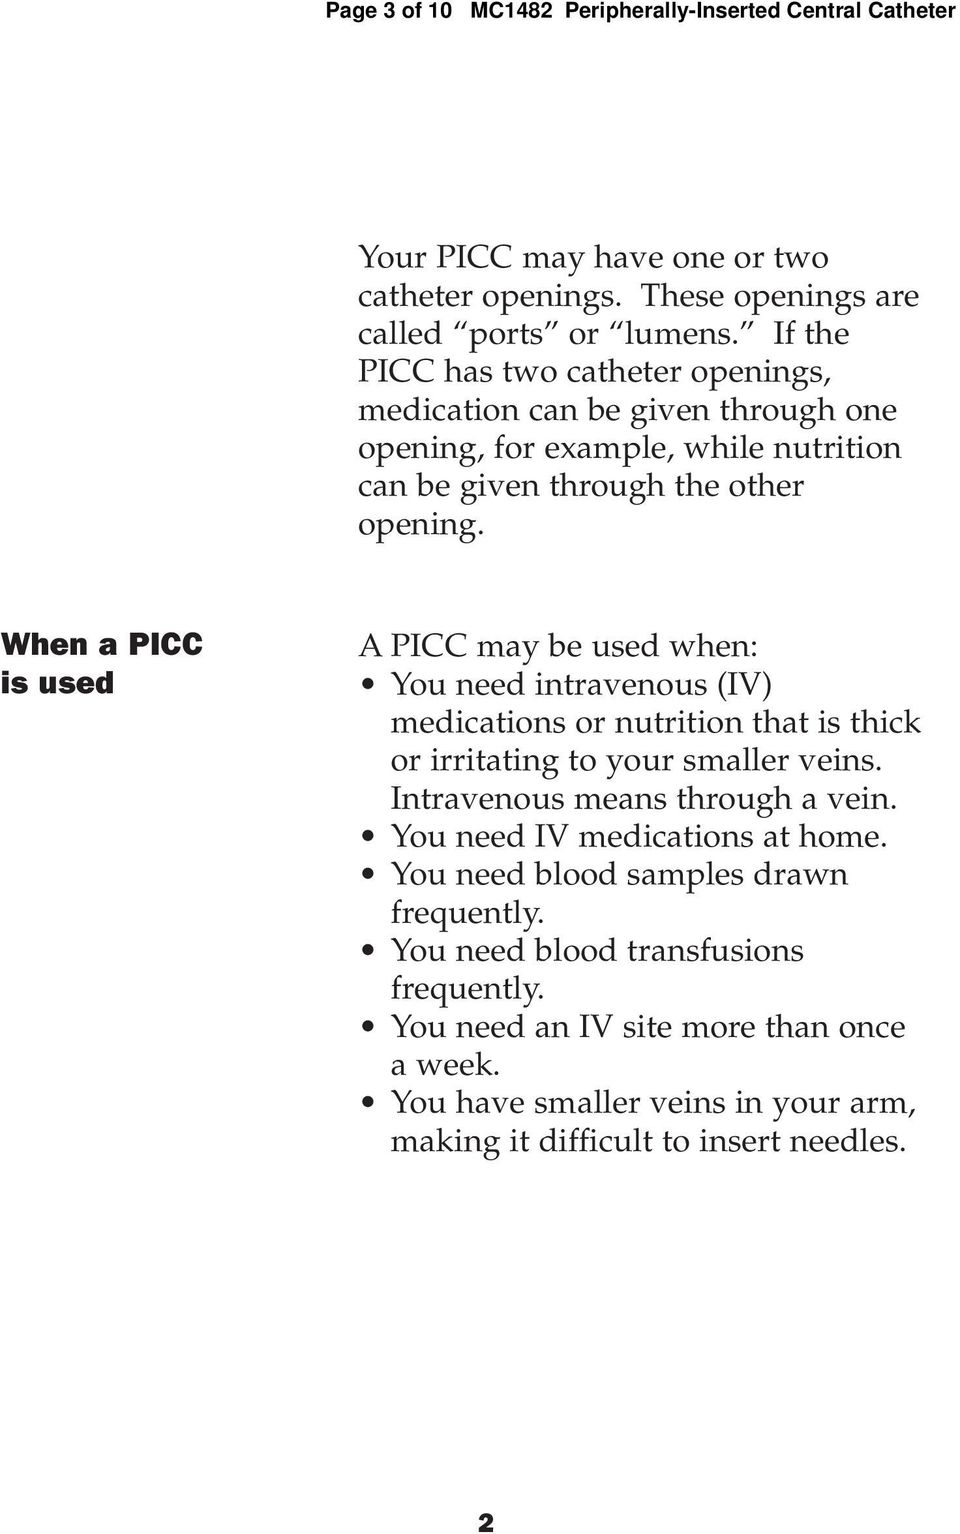 When a PICC is used A PICC may be used when: You need intravenous (IV) medications or nutrition that is thick or irritating to your smaller veins. Intravenous means through a vein.